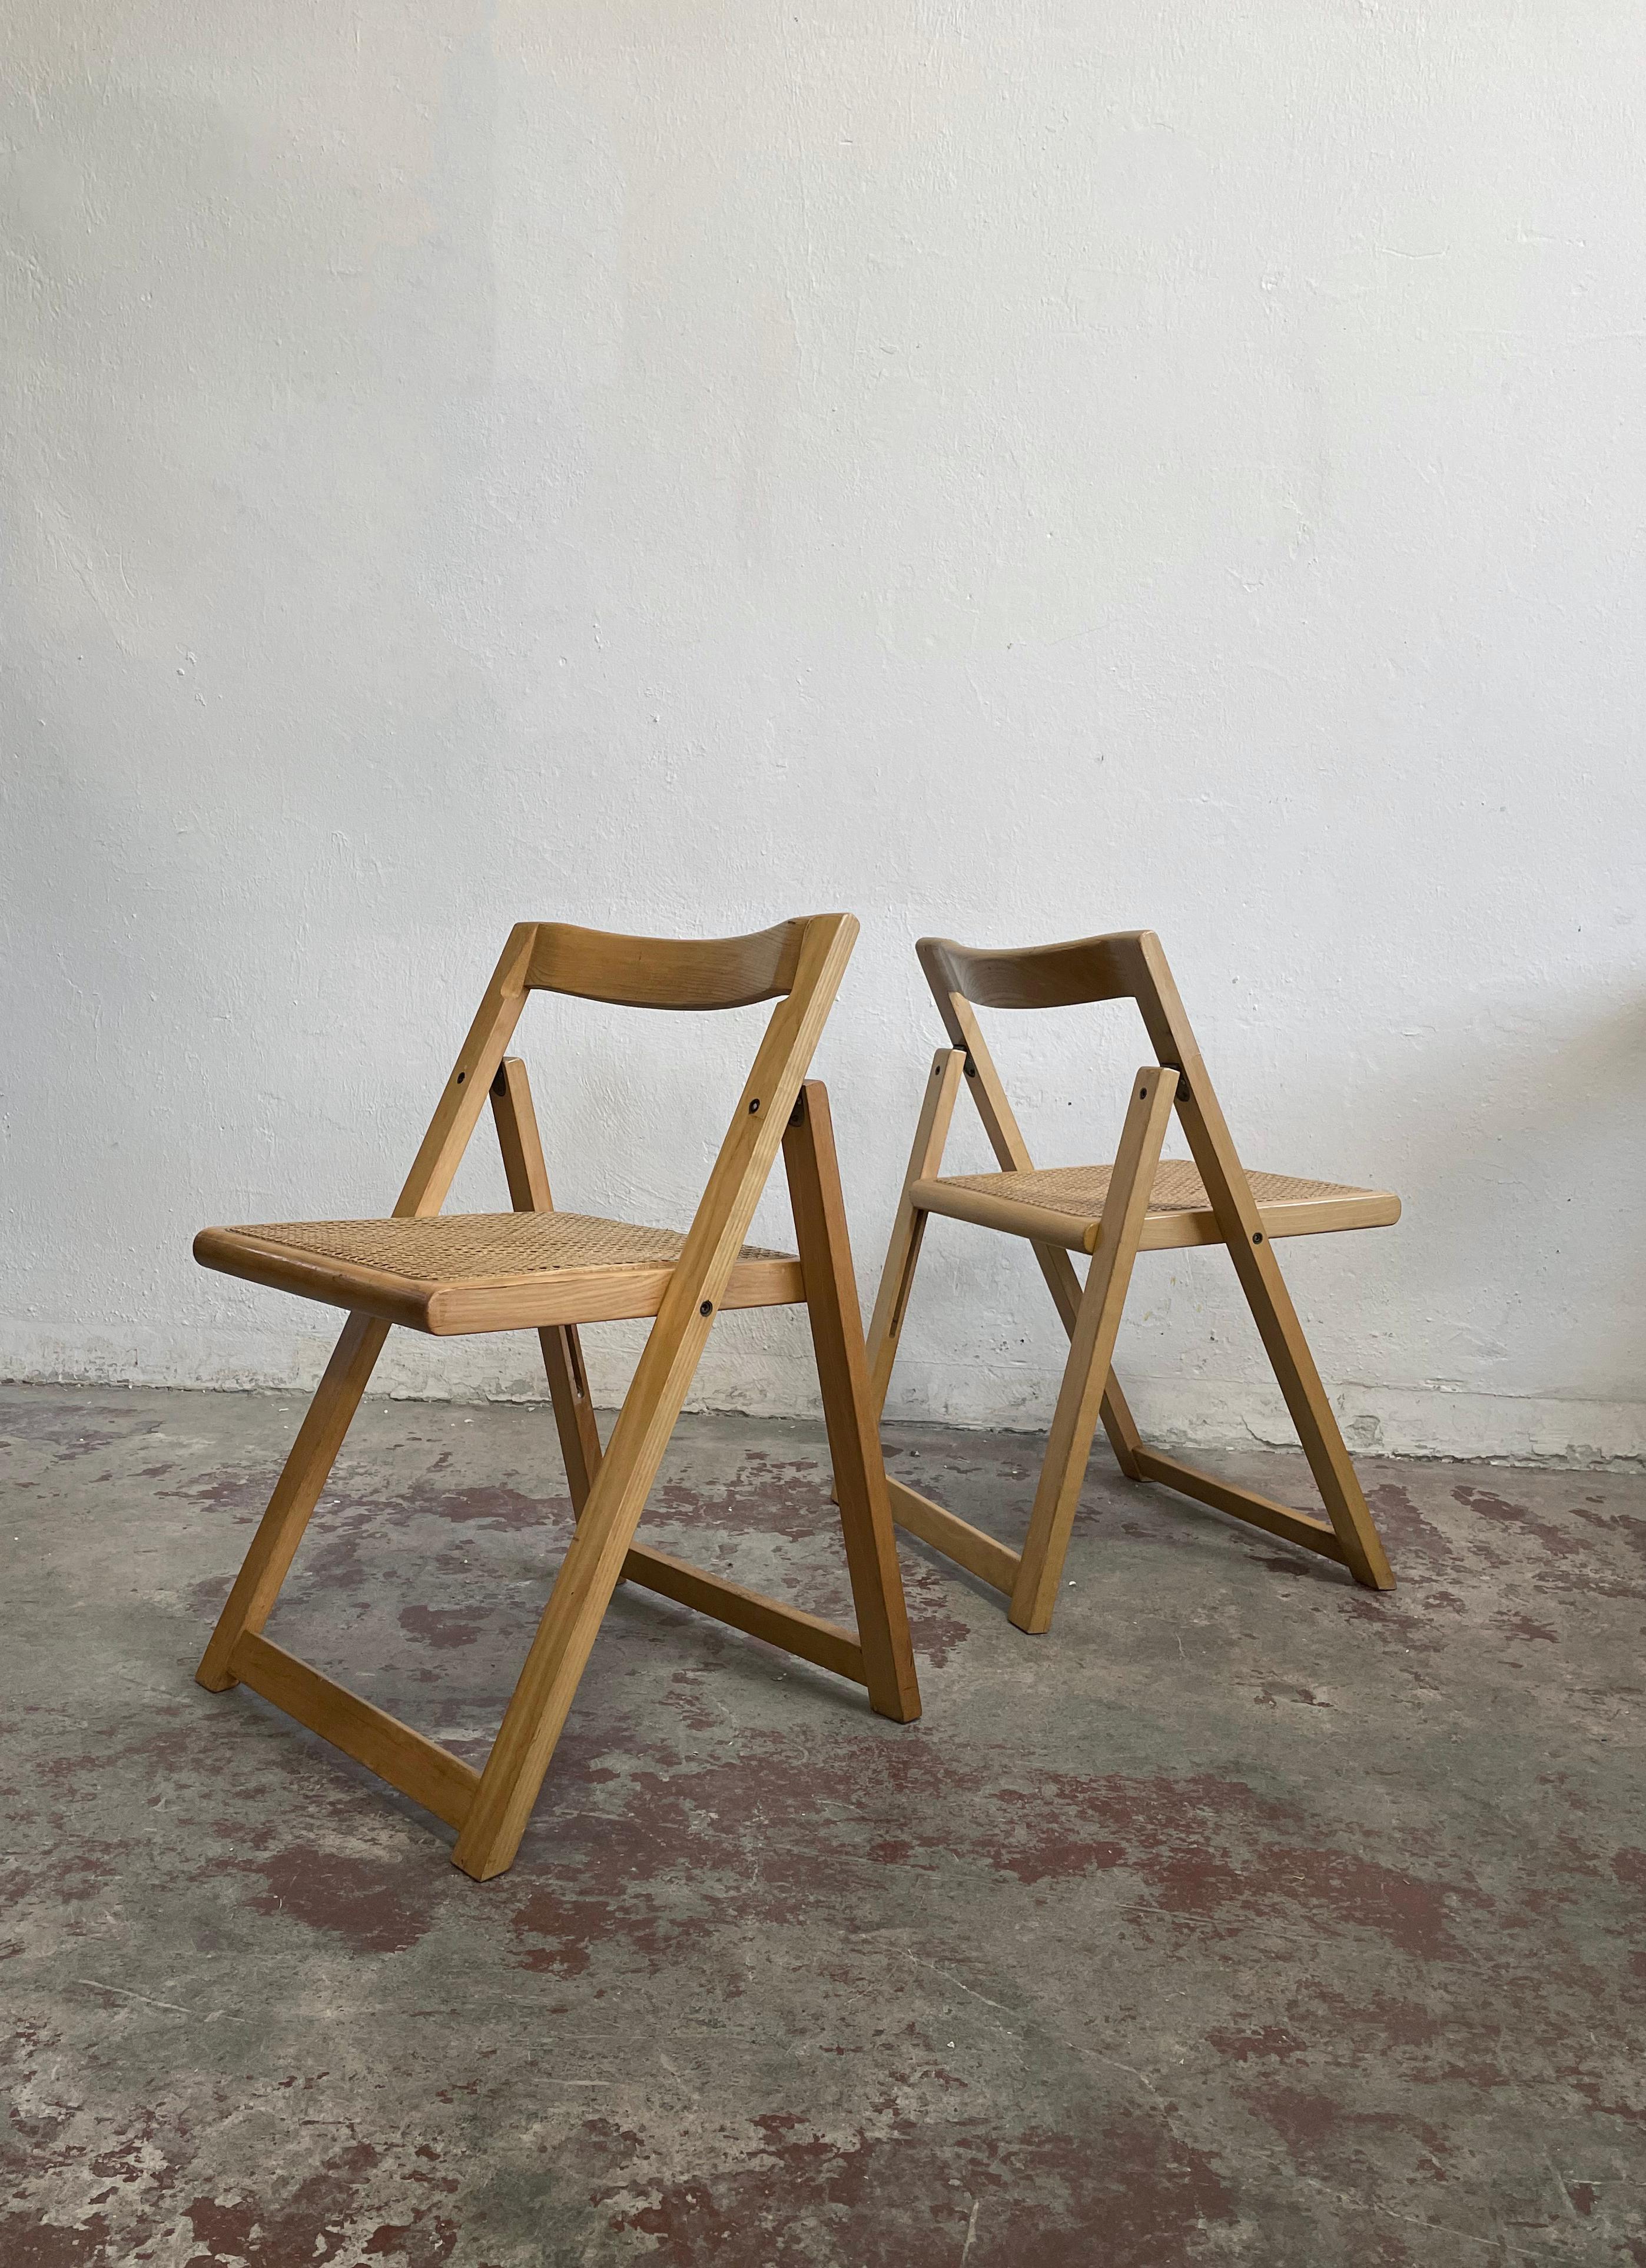 Offered for sale is a set of 2 vintage Italian folding chairs

The chairs are made of solid wood (beech) frame and cane seat

The chairs are in the style of the famous 'Trieste' chair designed by Aldo Jacober and Pierangela d’Aniello

The year